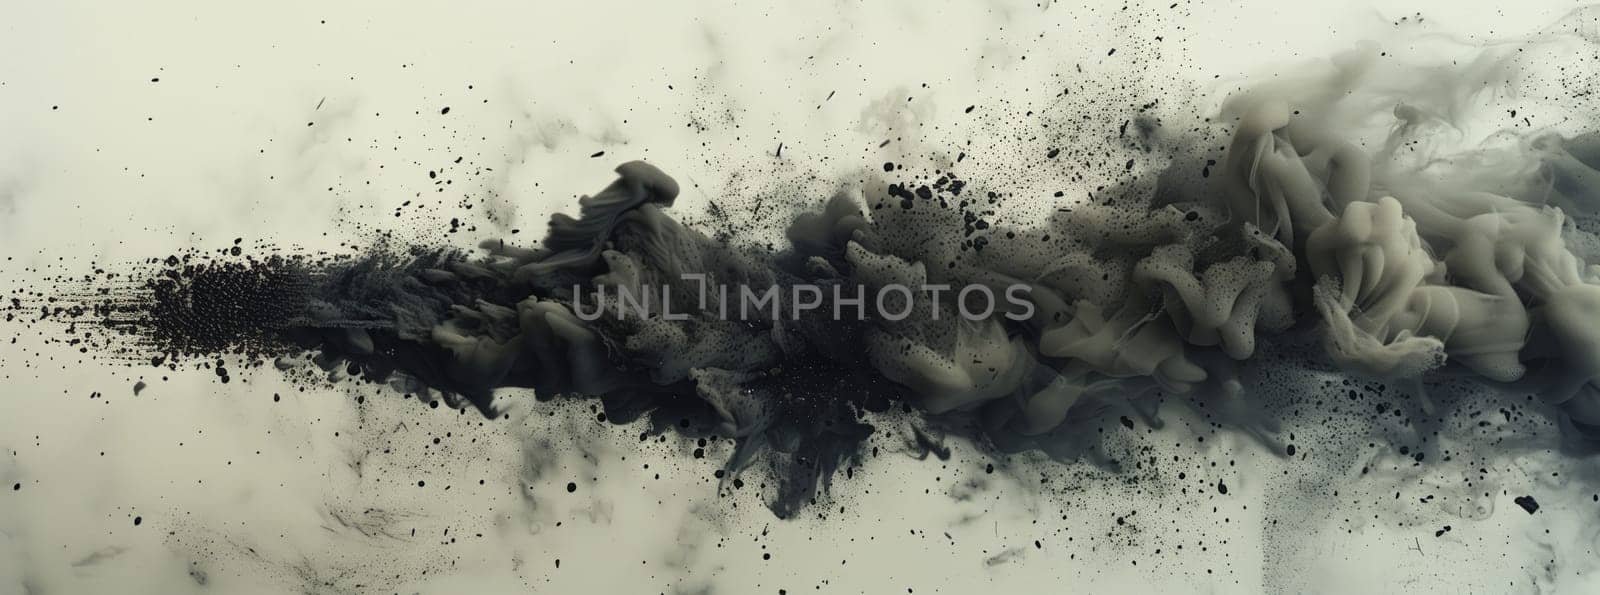 A close up of cumulus clouds resembling smoke emerging from a pipe against a white background, creating a stunning meteorological phenomenon art